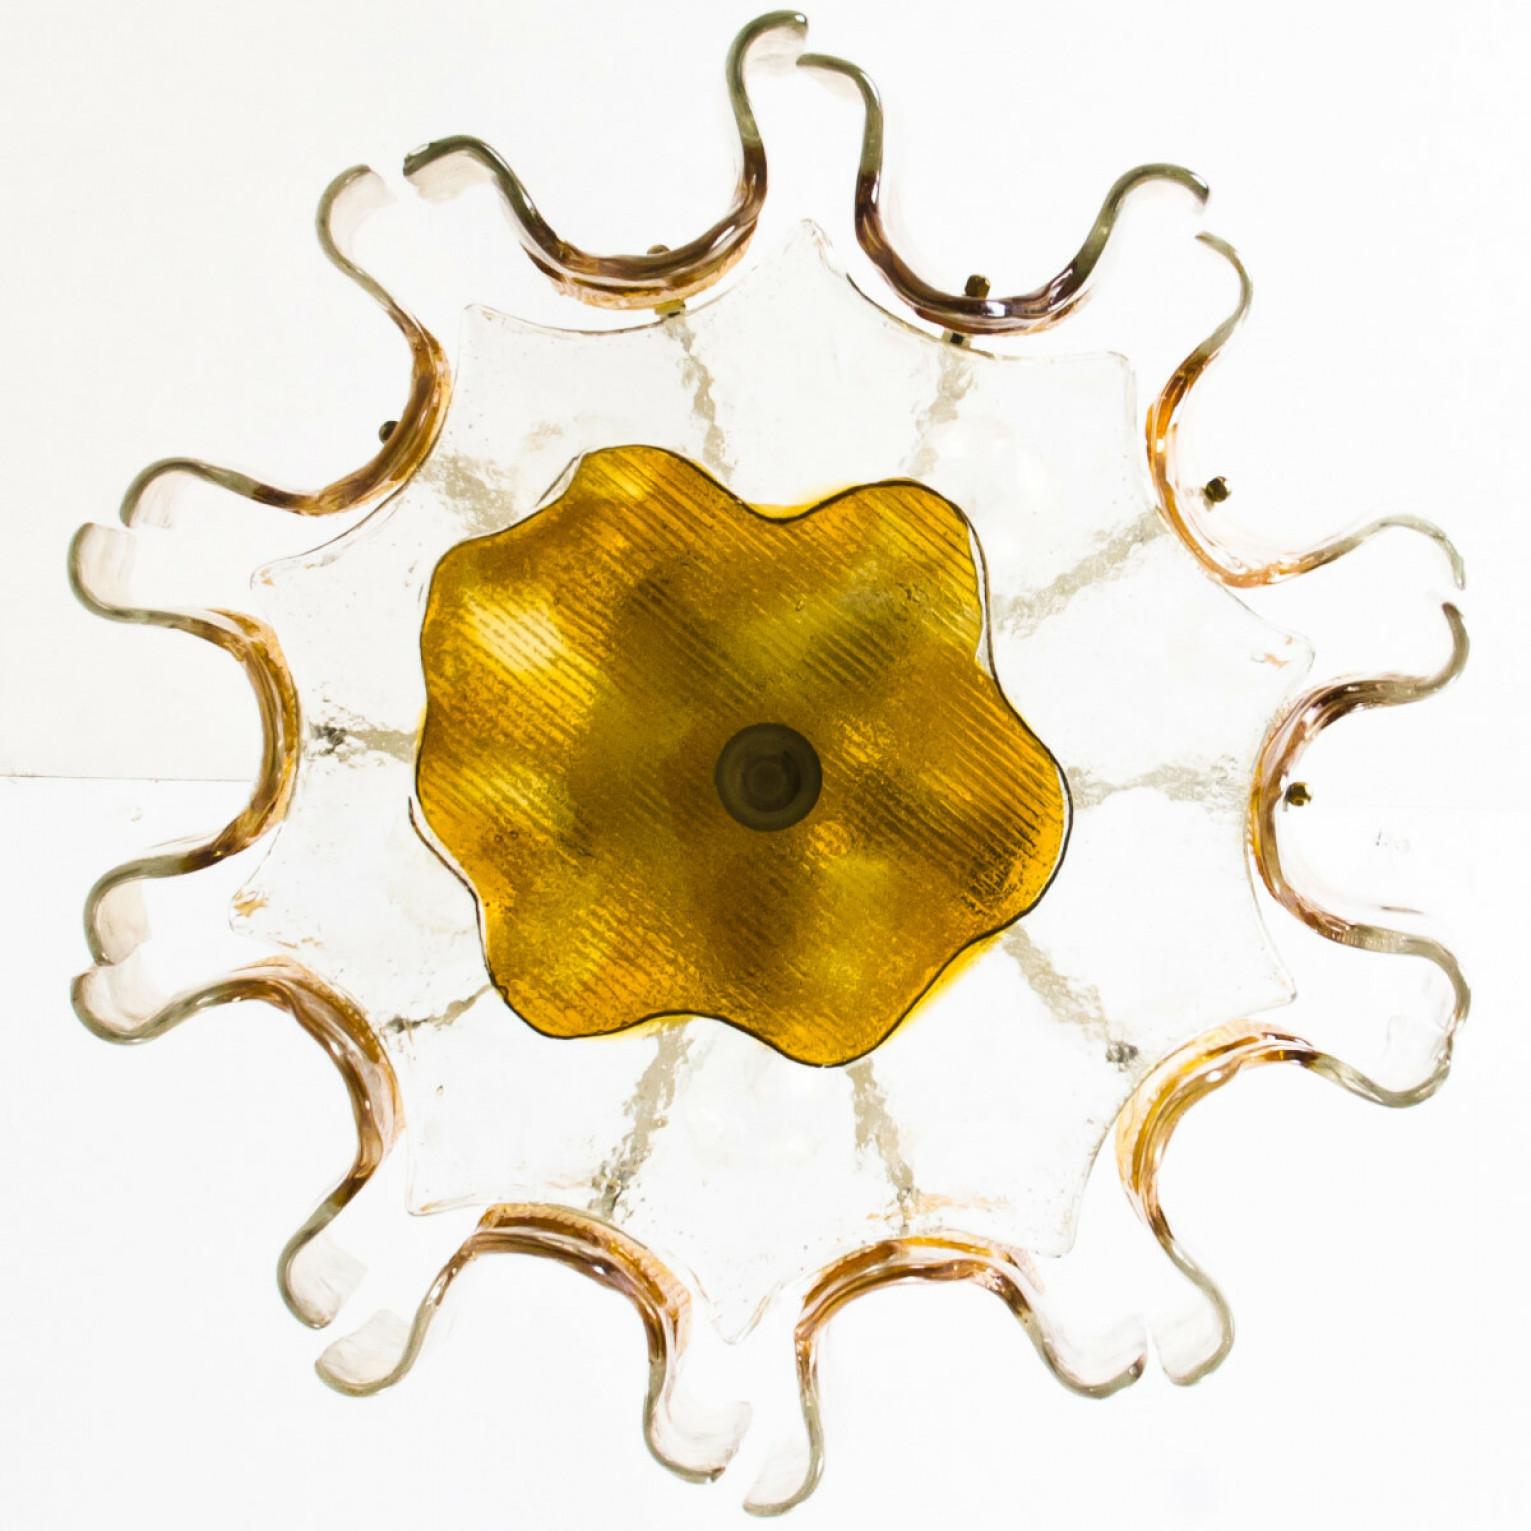 A beautiful light fixture in the style of Mazzega, manufactured in the mid century, circa 1970 (end of 1960s and beginning of 1970s). a bi-colored (clear and orange) hand blown glass. Each piece of glass meticulously hand formed in clear glass with